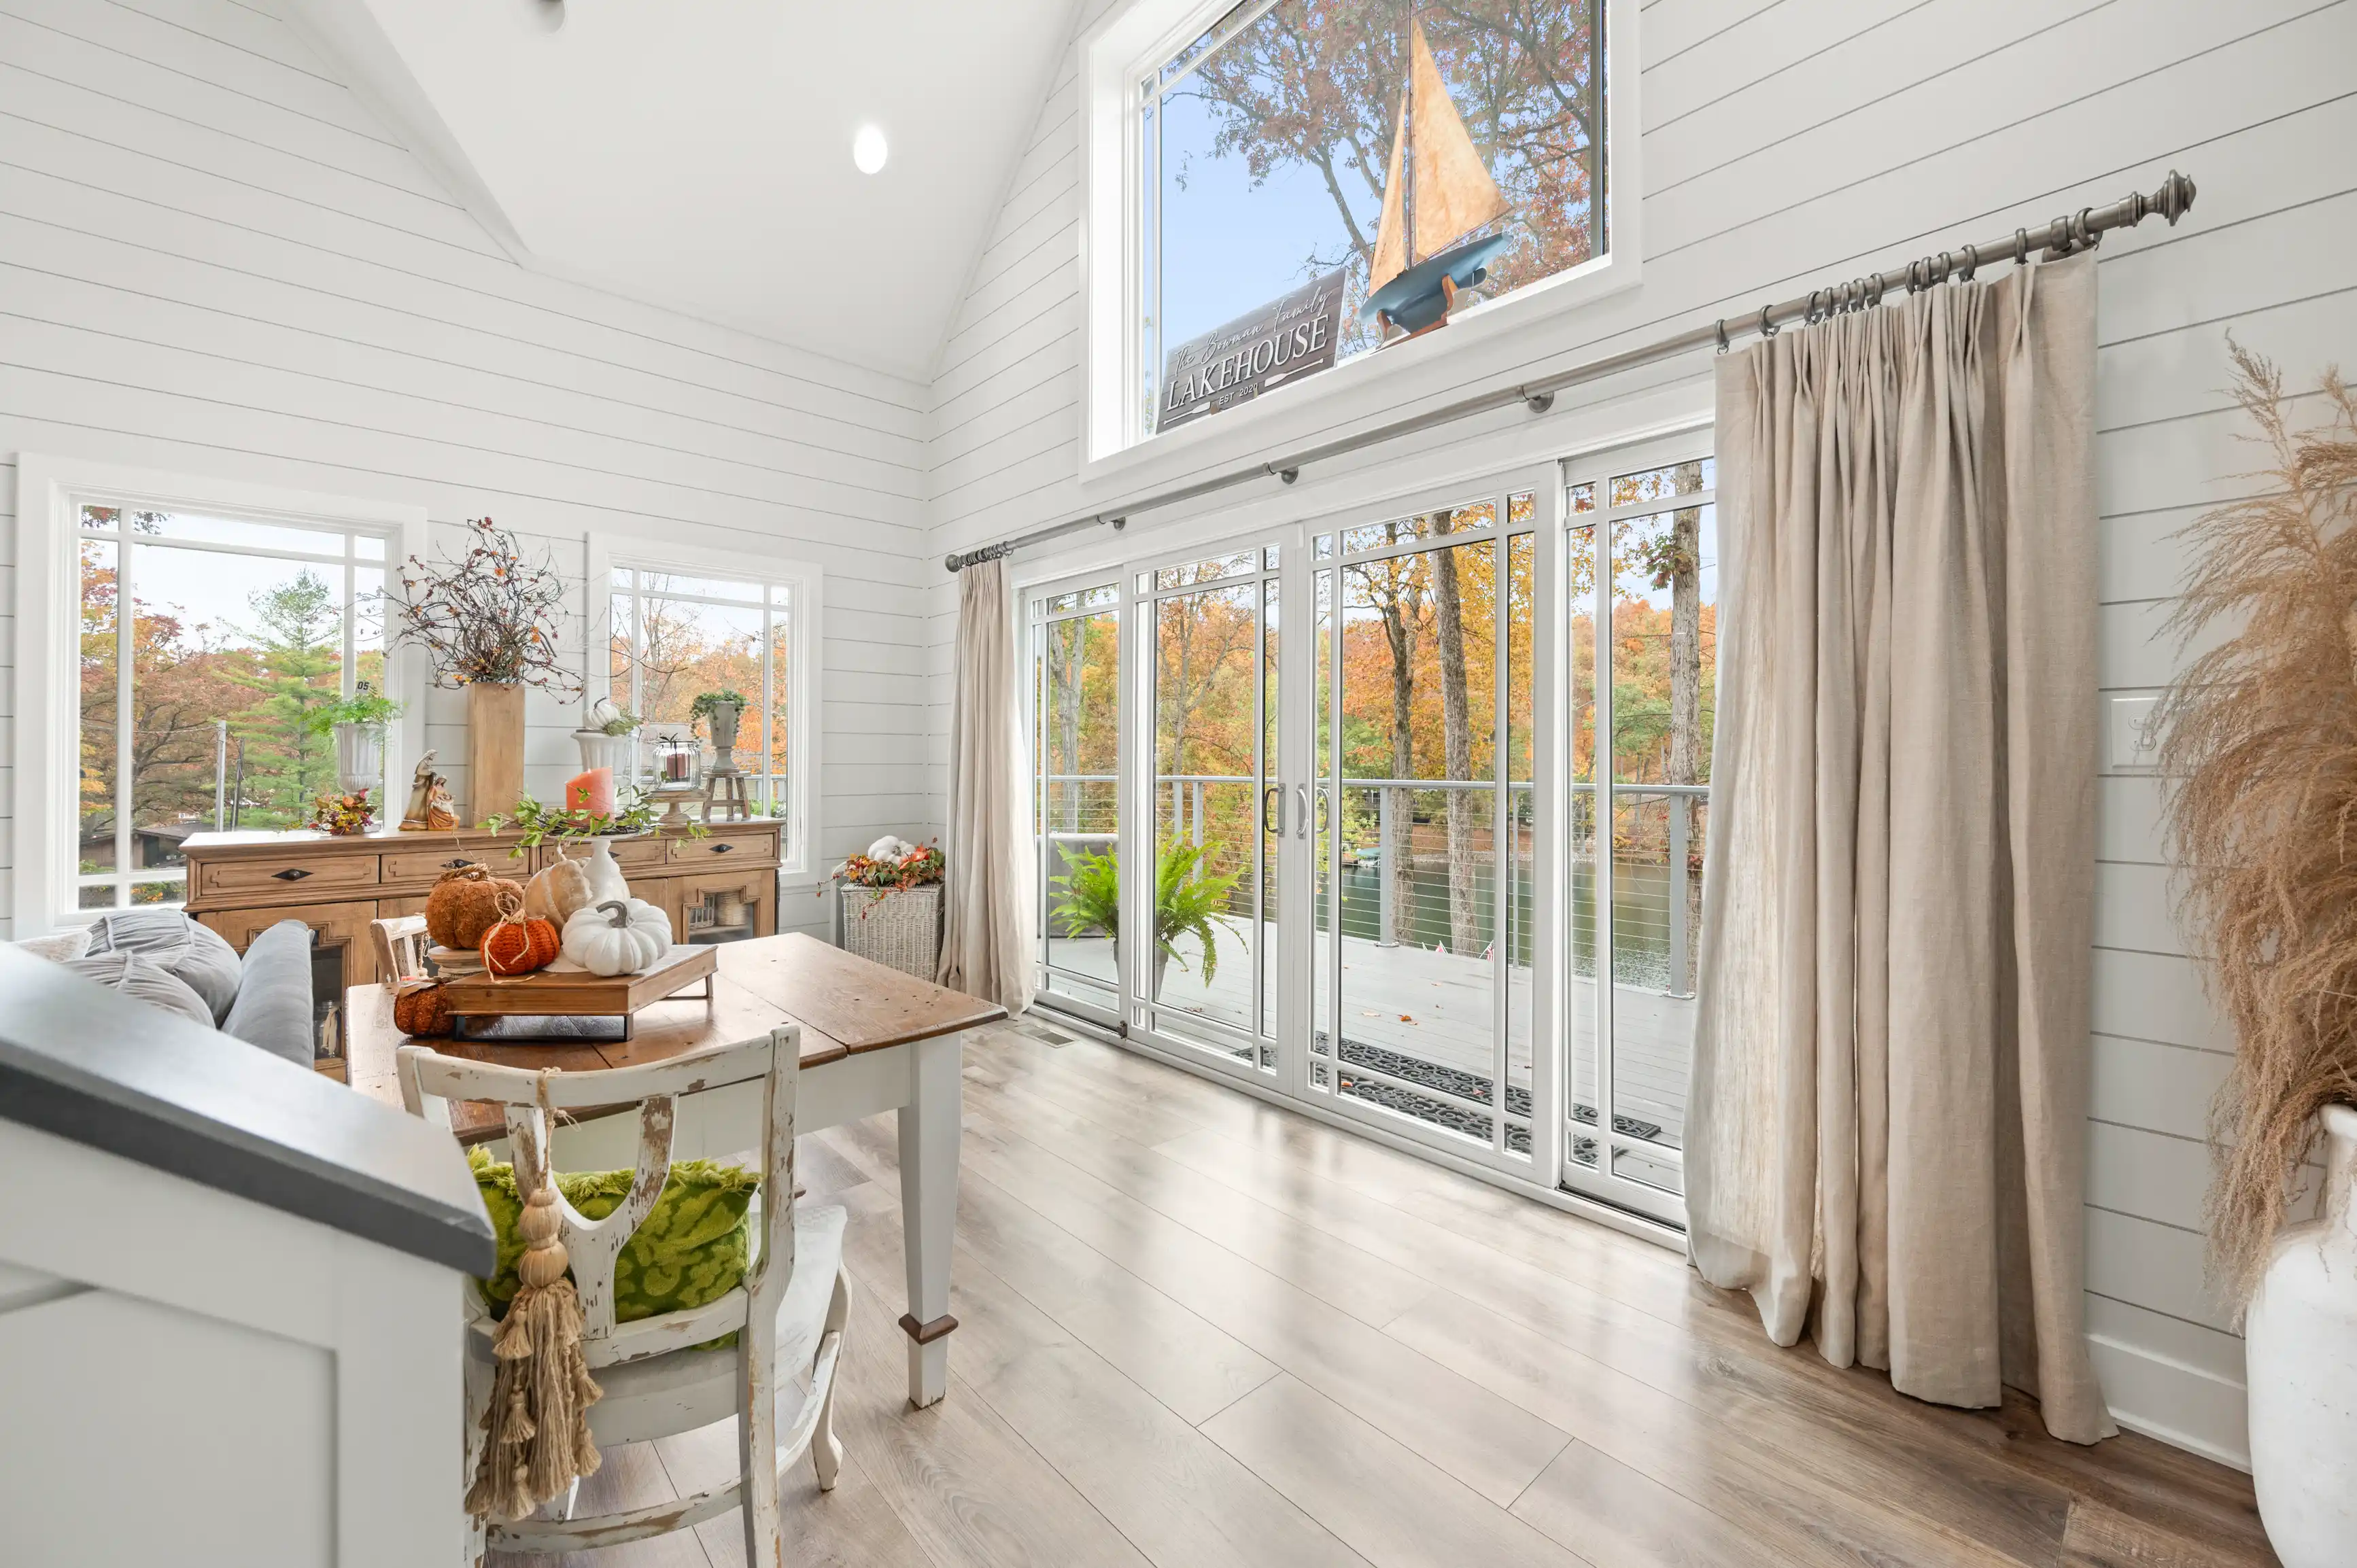 Bright and airy sunroom with shiplap walls and hardwood floors, tastefully decorated with autumn decor, featuring a view of trees with fall foliage through large glass doors.